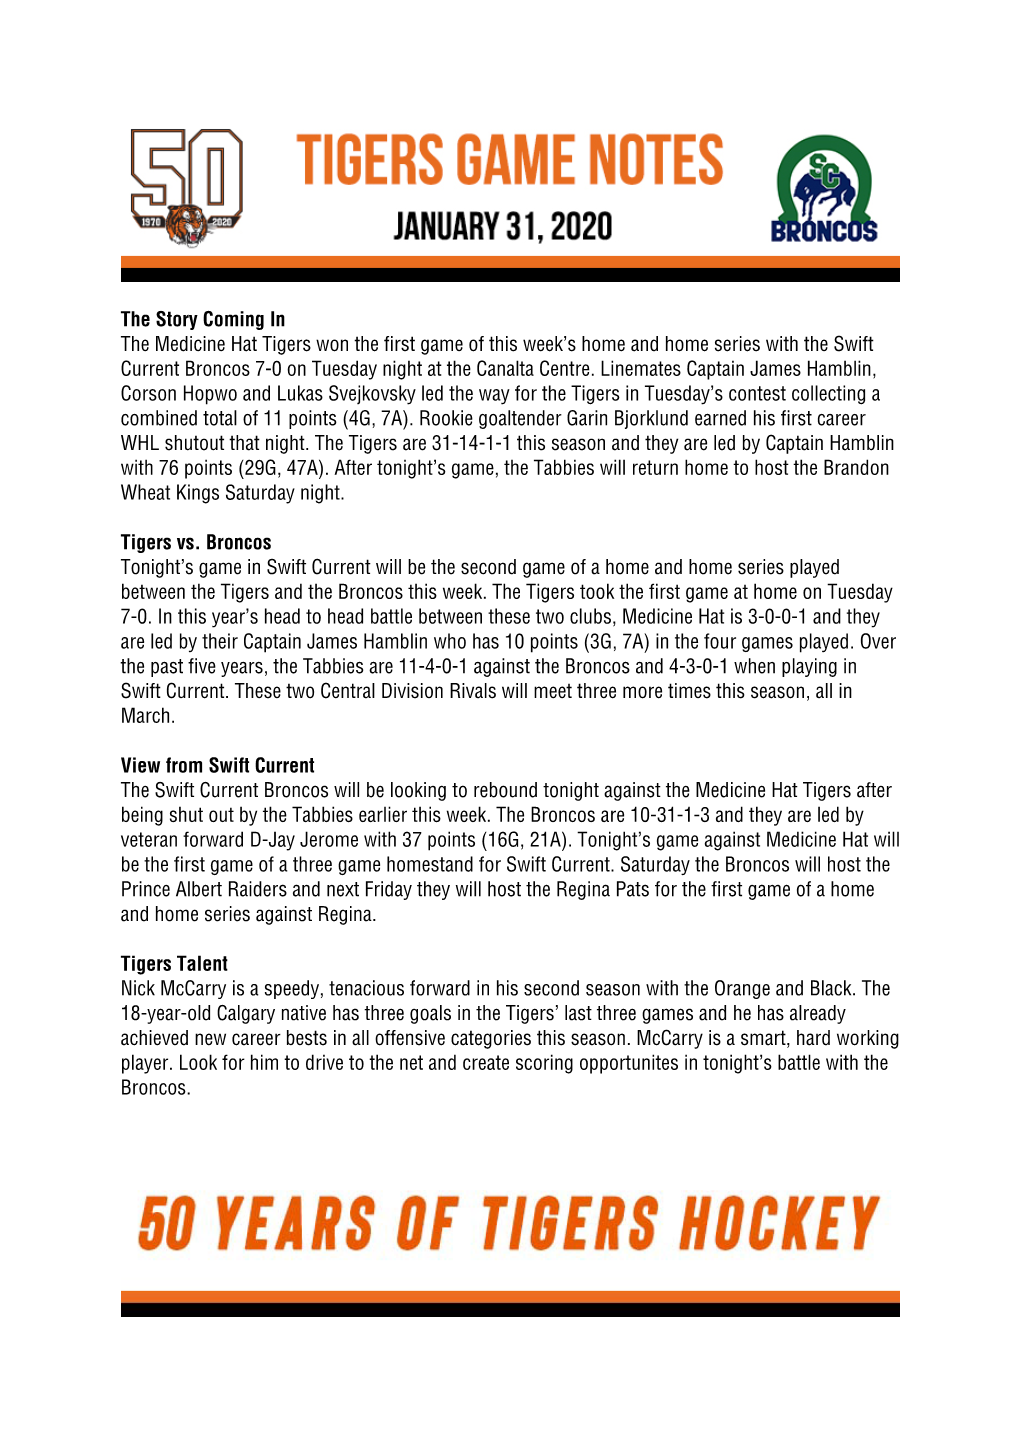 The Story Coming in the Medicine Hat Tigers Won the First Game of This